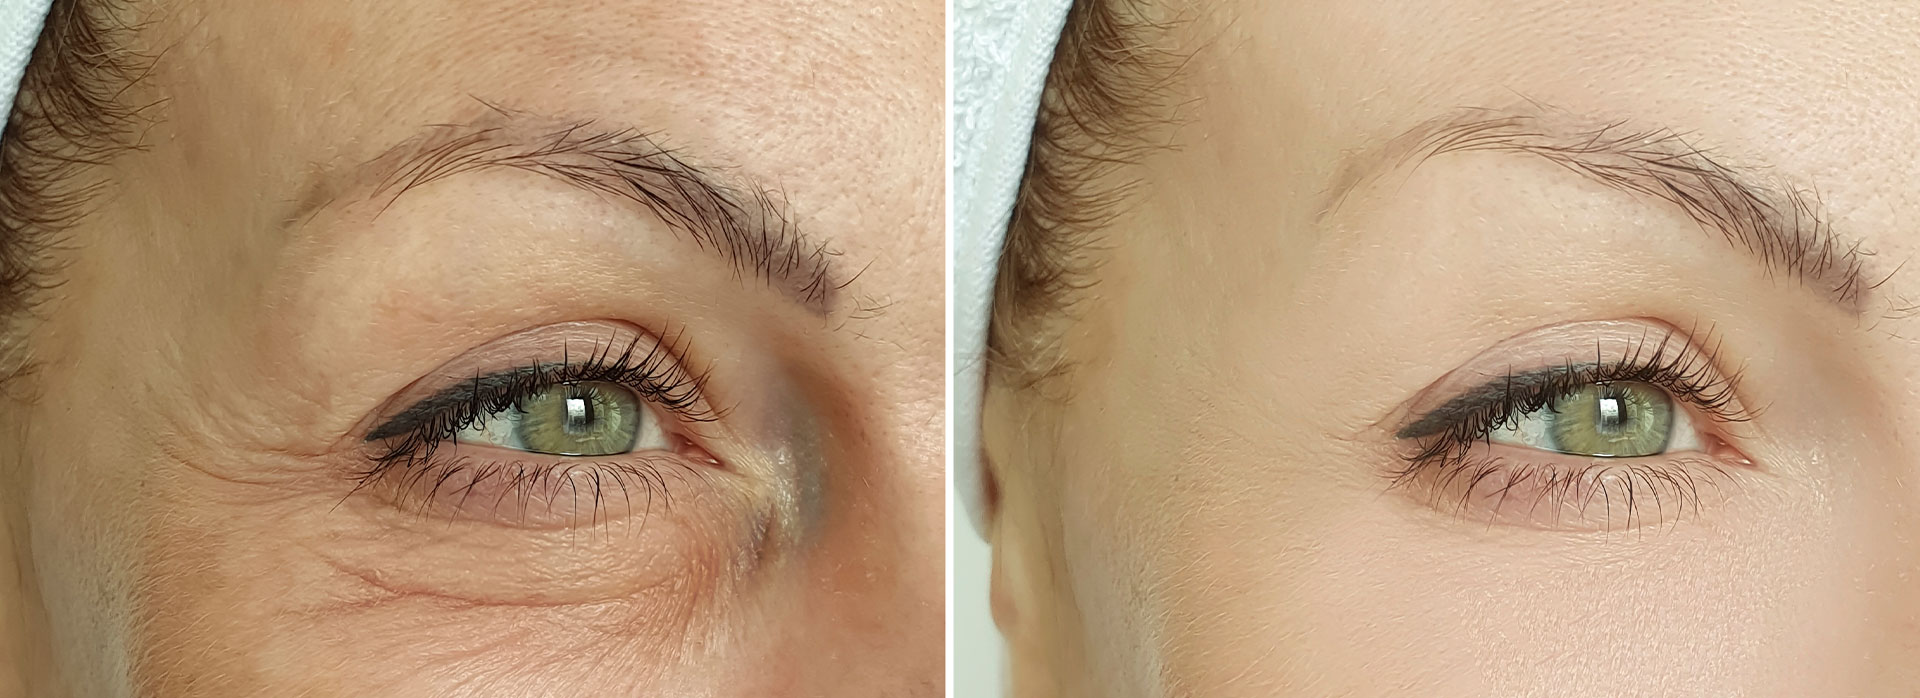 Before and after image of a person s eye area, showcasing the results of an eye treatment or cosmetic procedure.